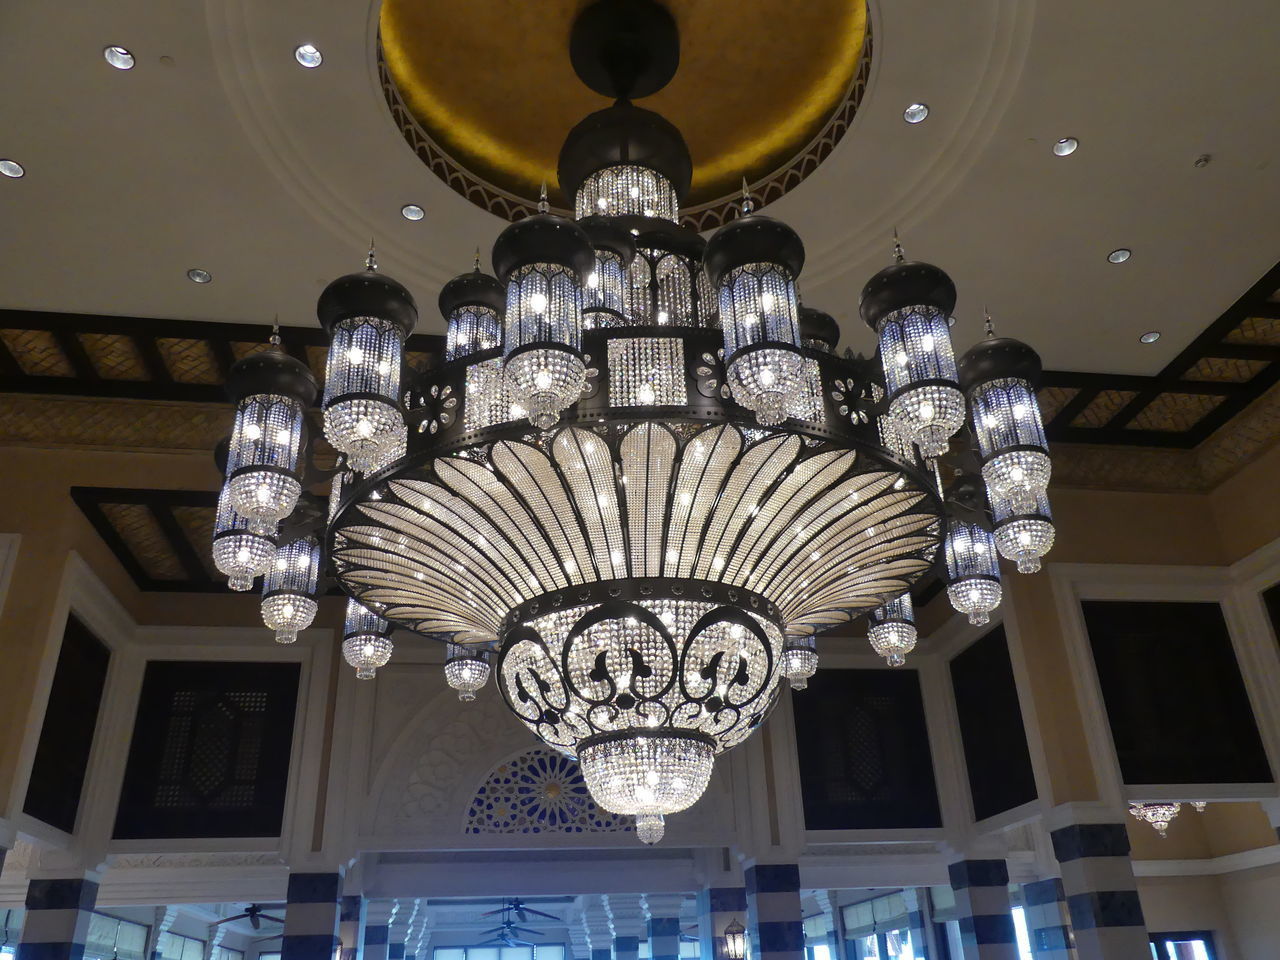 LOW ANGLE VIEW OF ILLUMINATED CHANDELIER